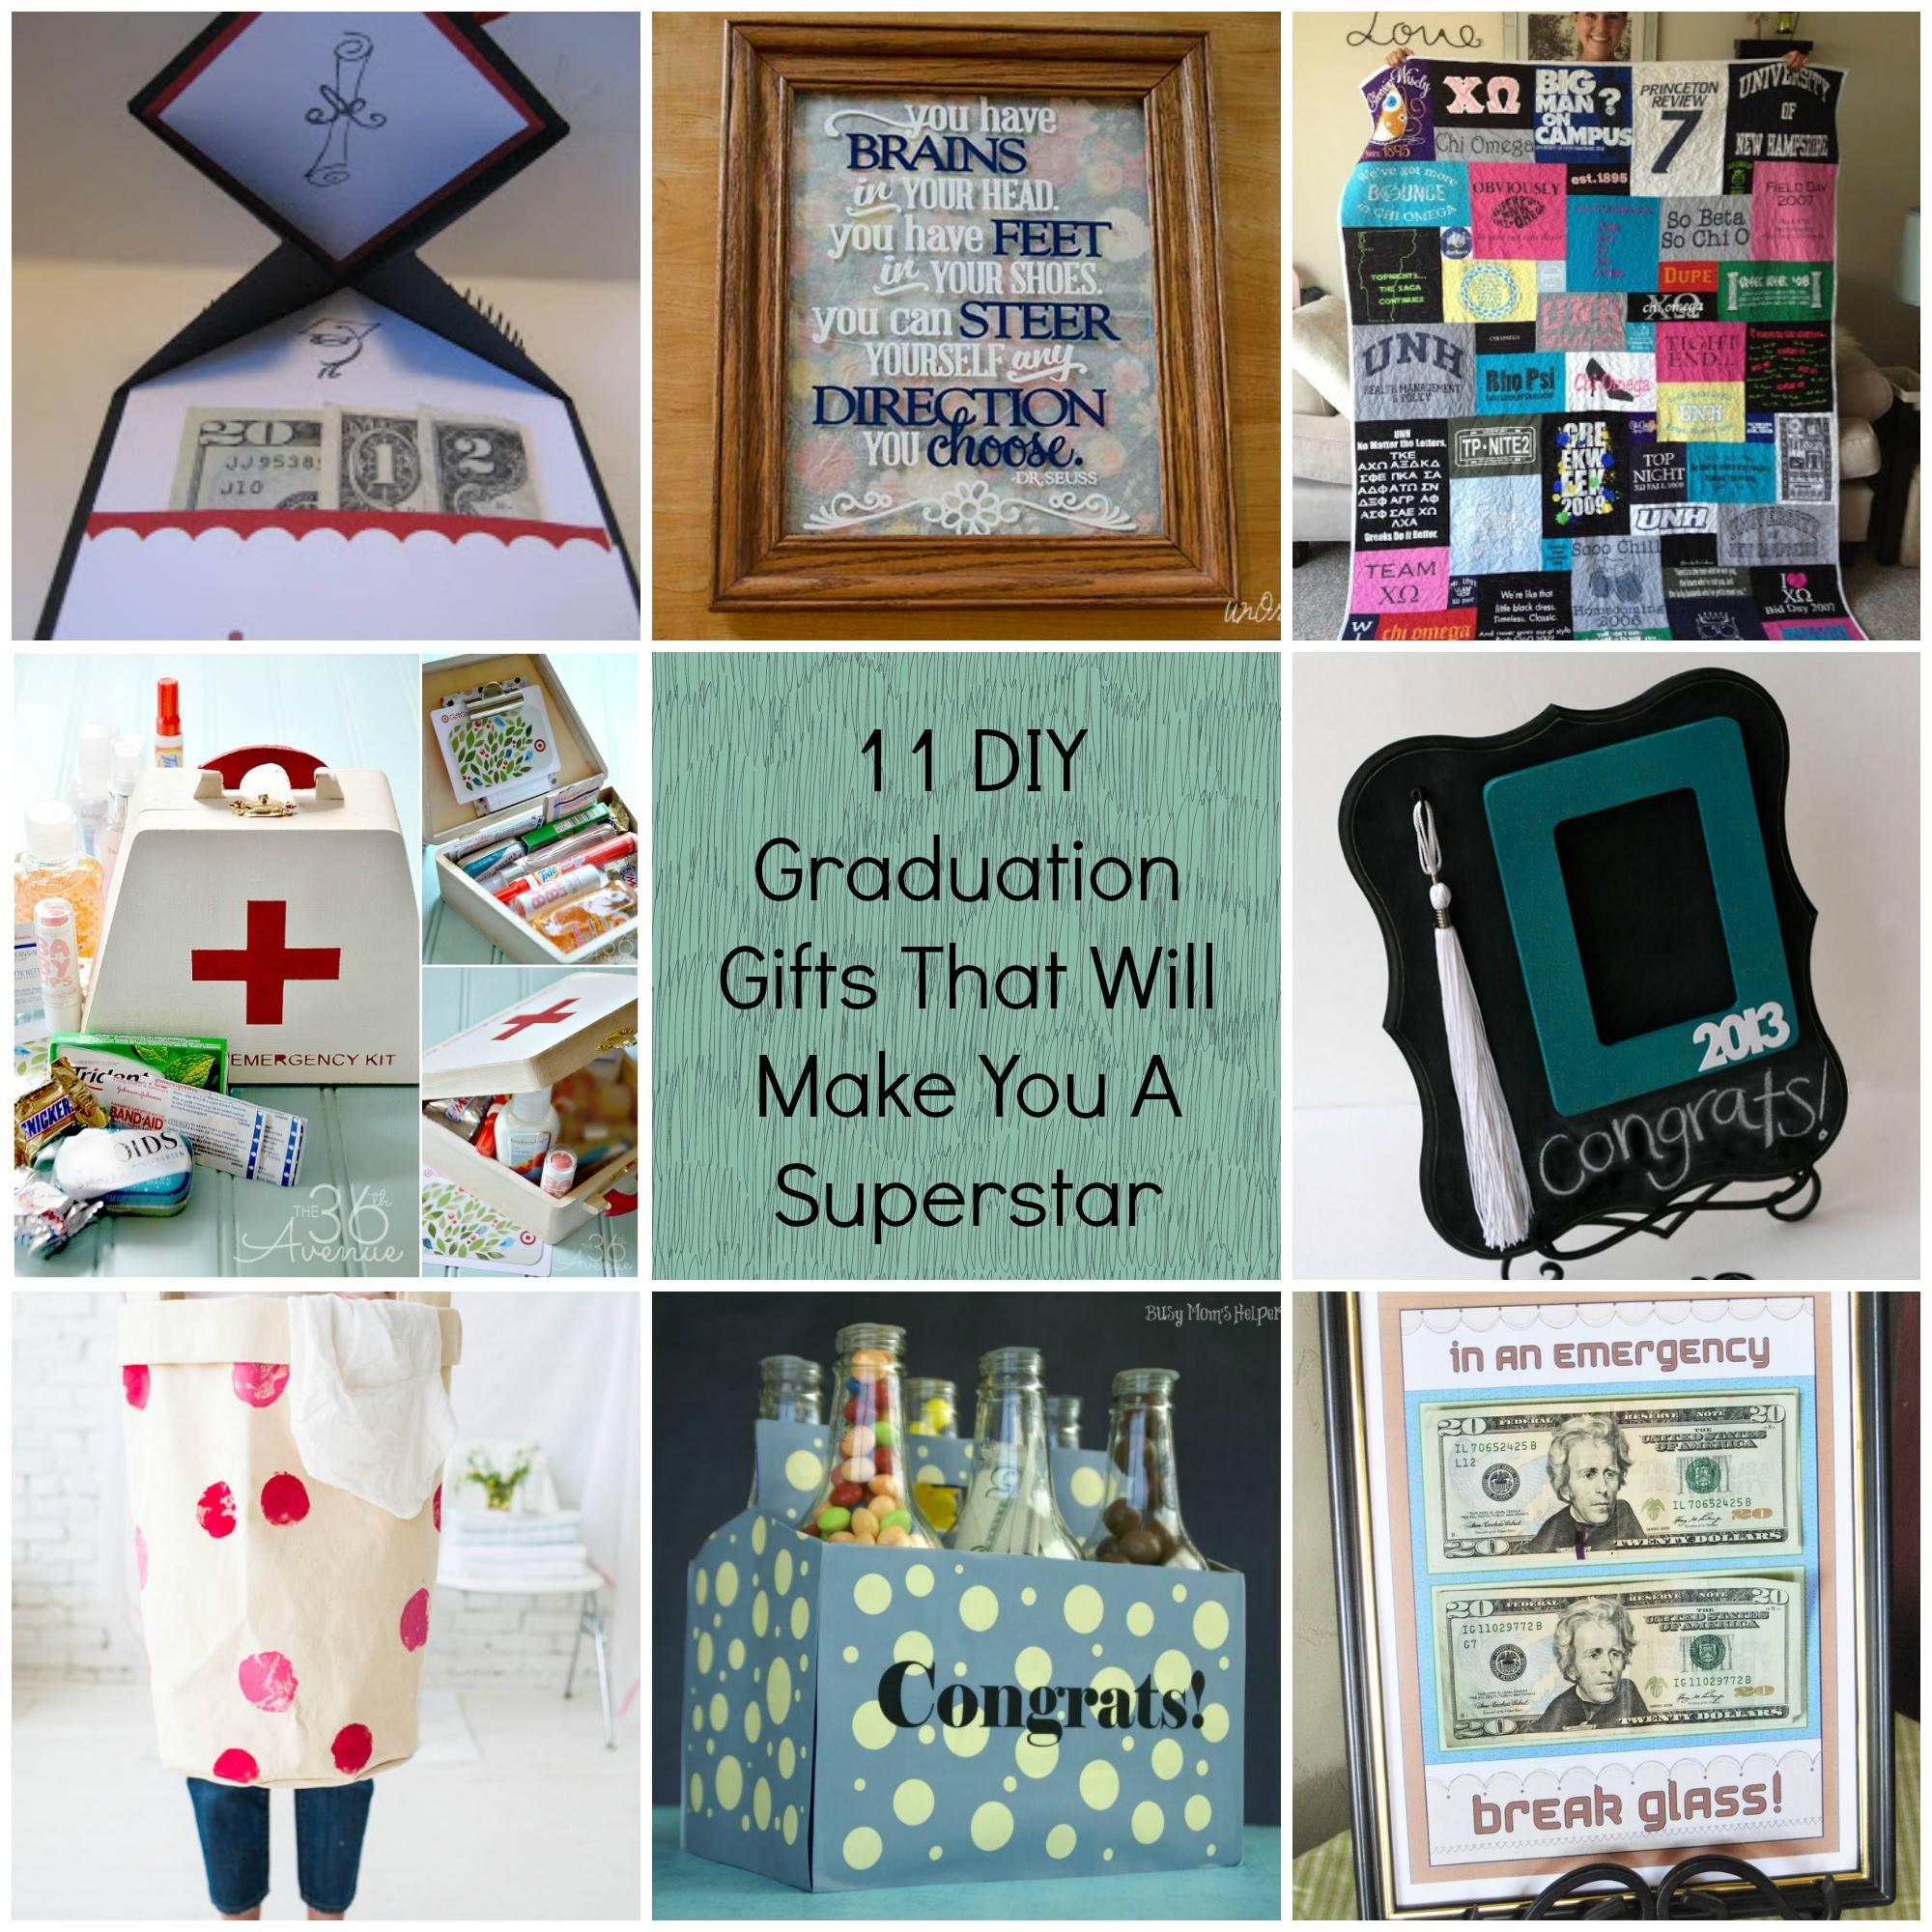 DIY Graduation Gifts
 11 DIY Graduation Gifts That Will Make You A Superstar